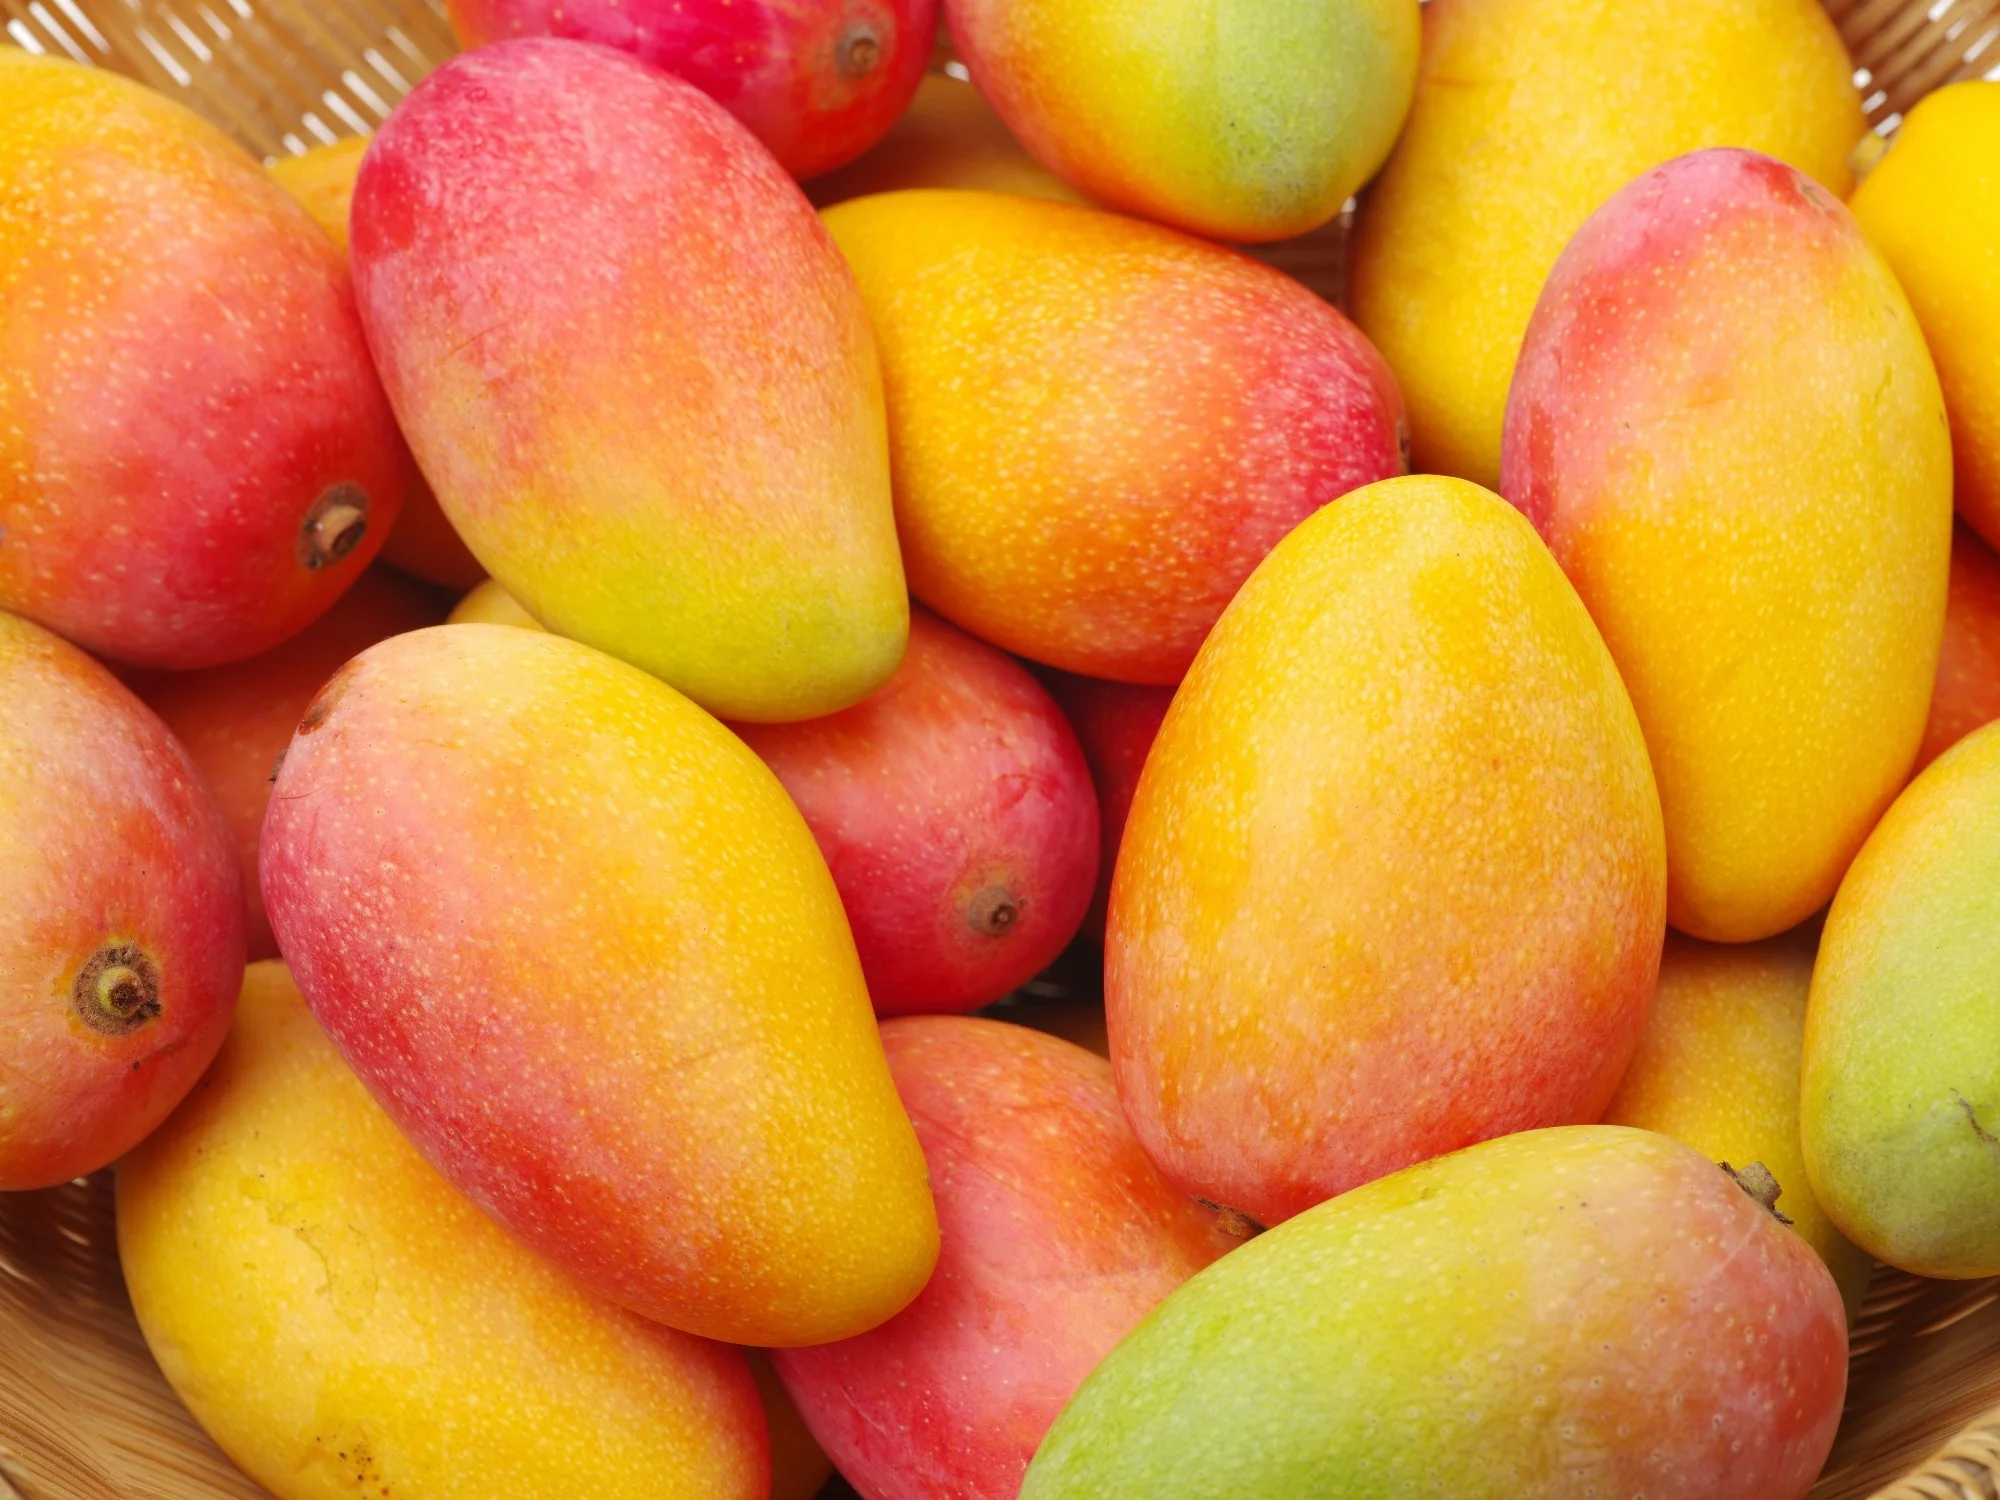 Eat mangoes with the skin to get full nutrients — Dietician